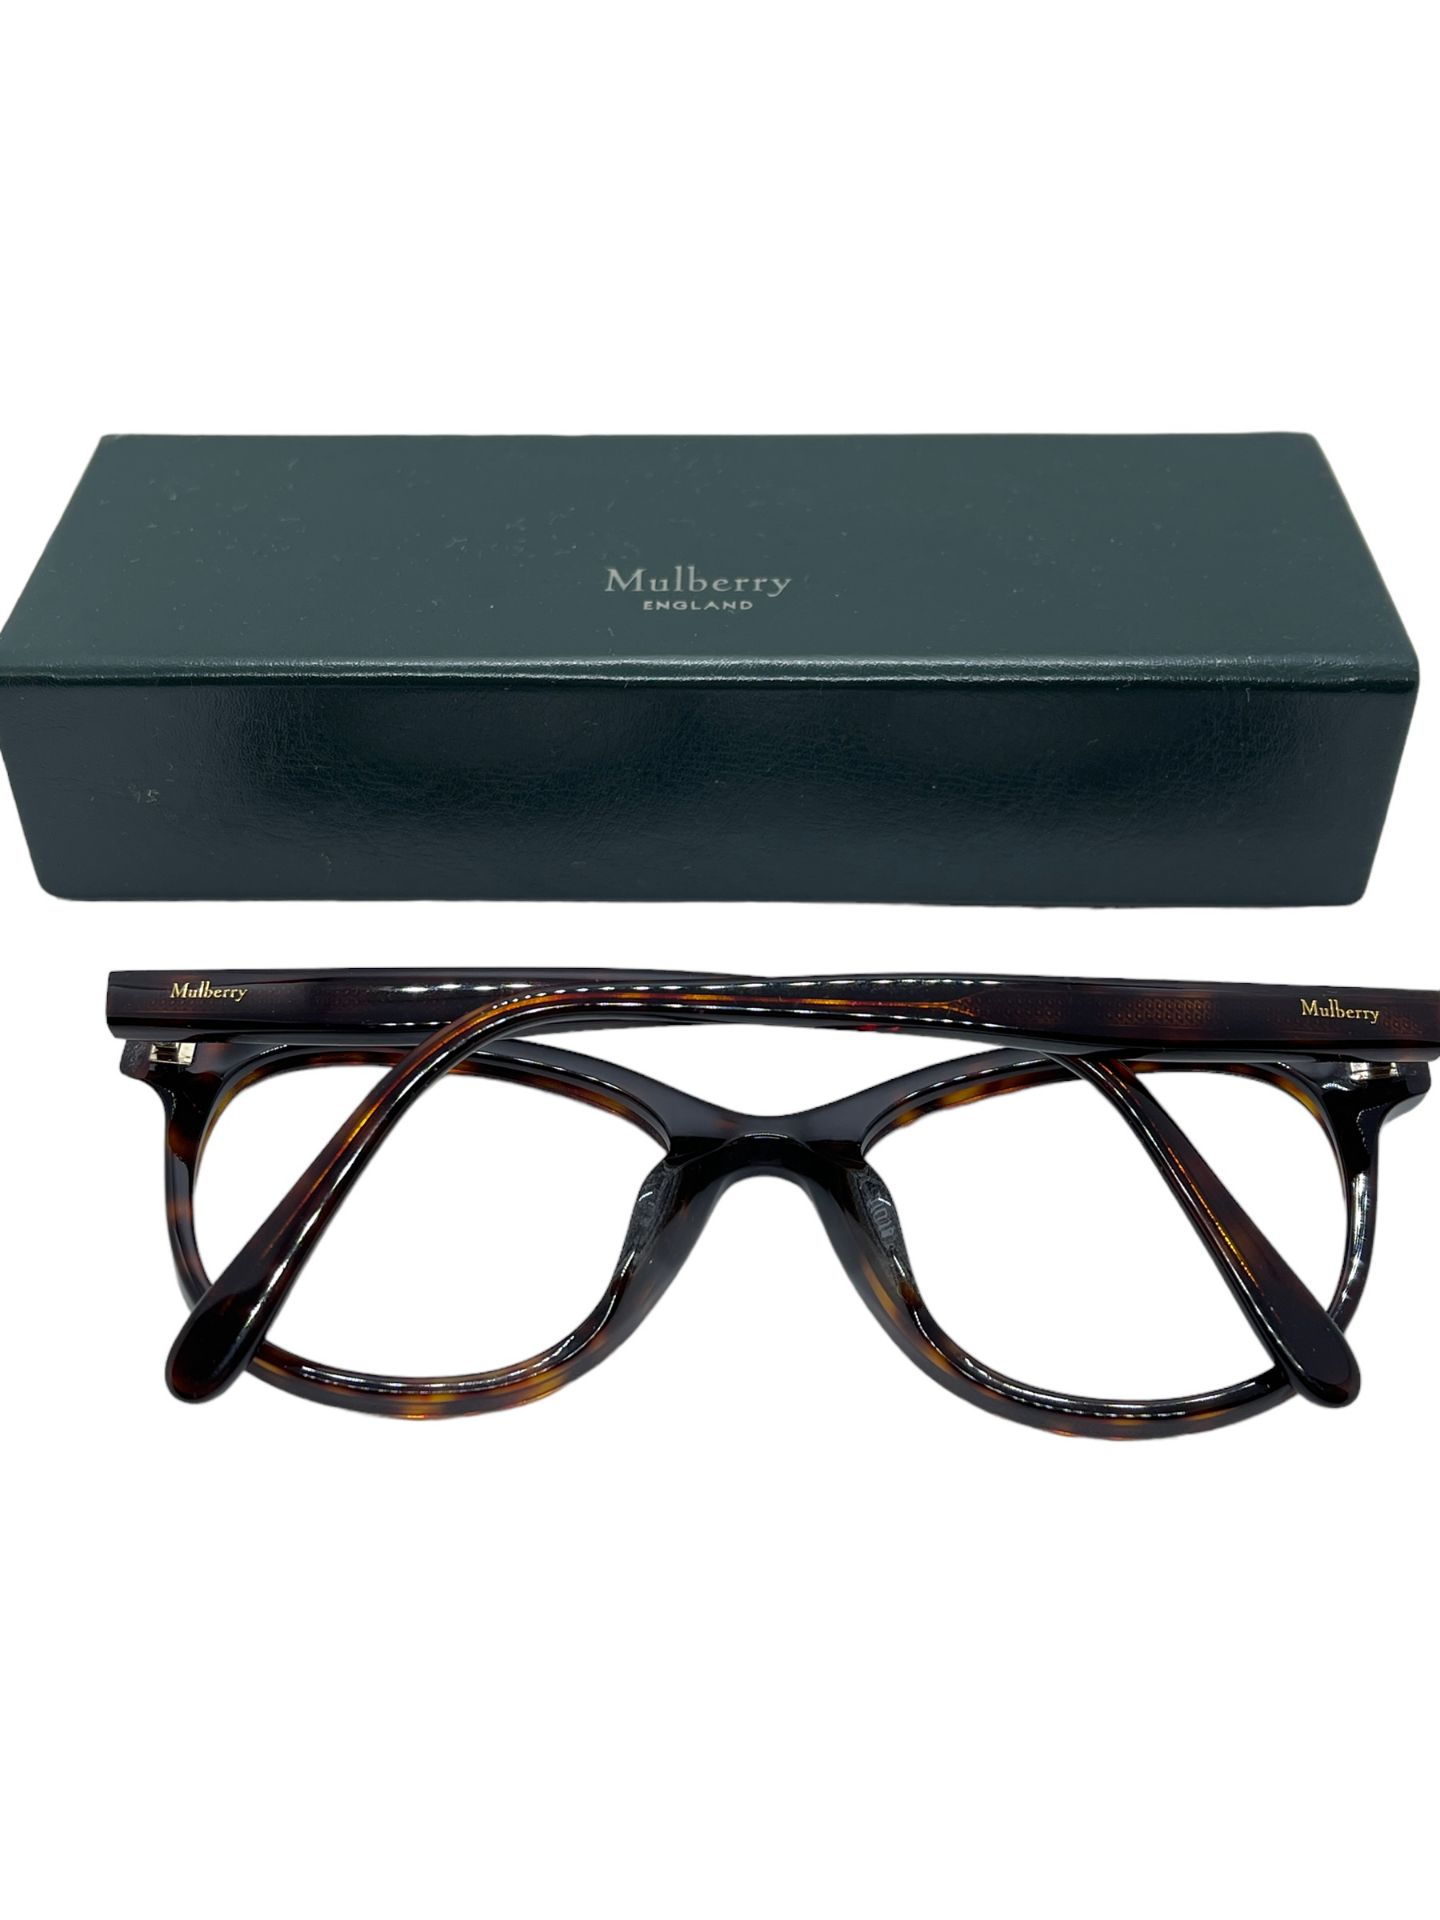 Mulberry Specticals xdemo boxed case unisex - Image 3 of 6